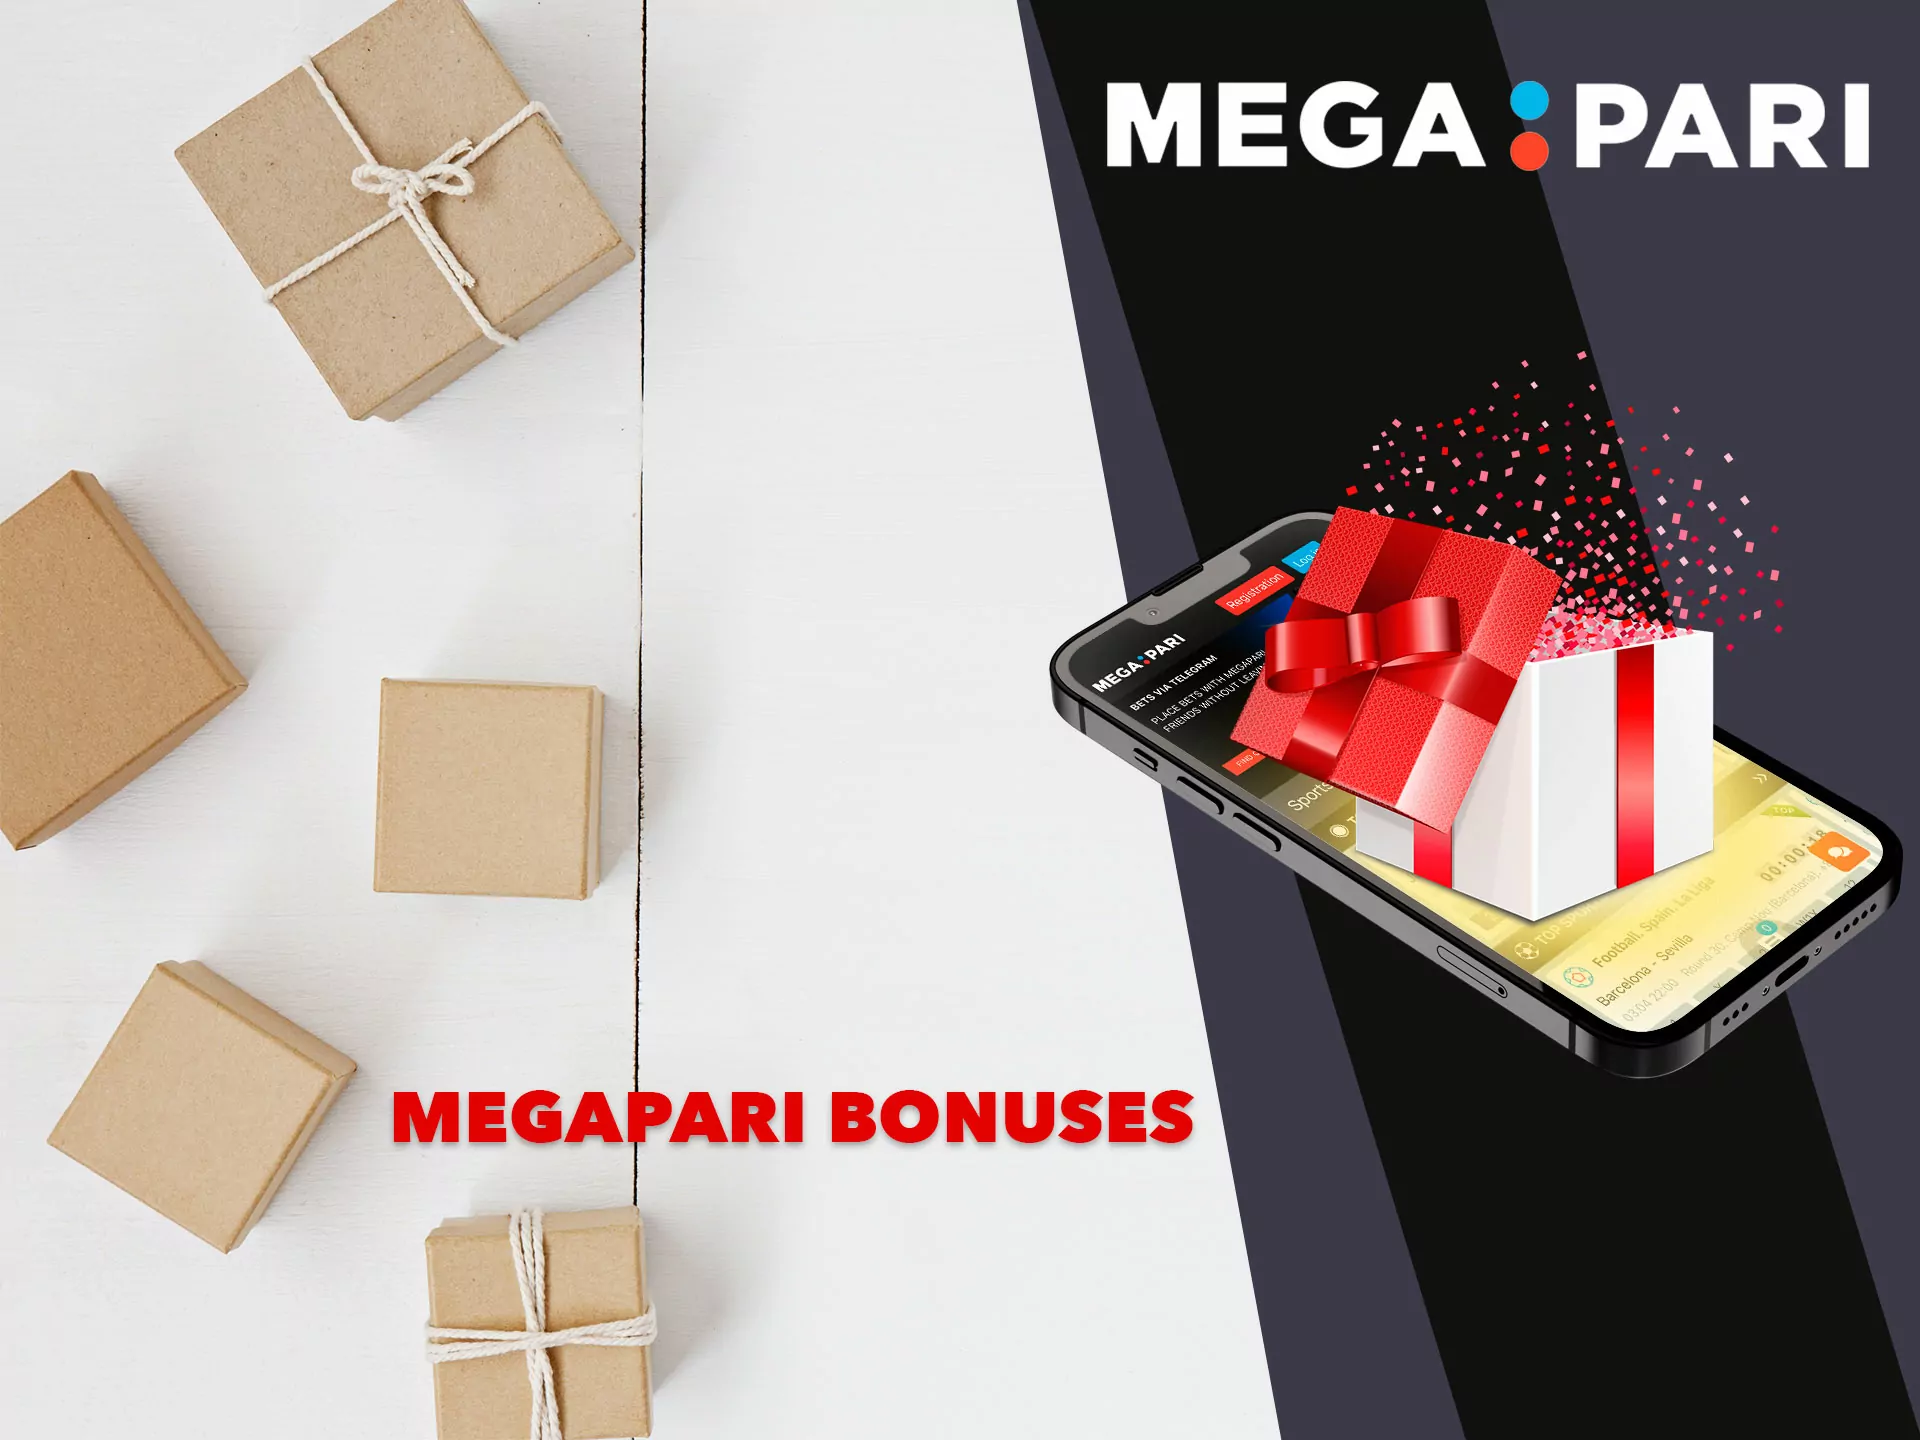 Megapari app makes your bets exciting and memorable by providing numerous bonuses.